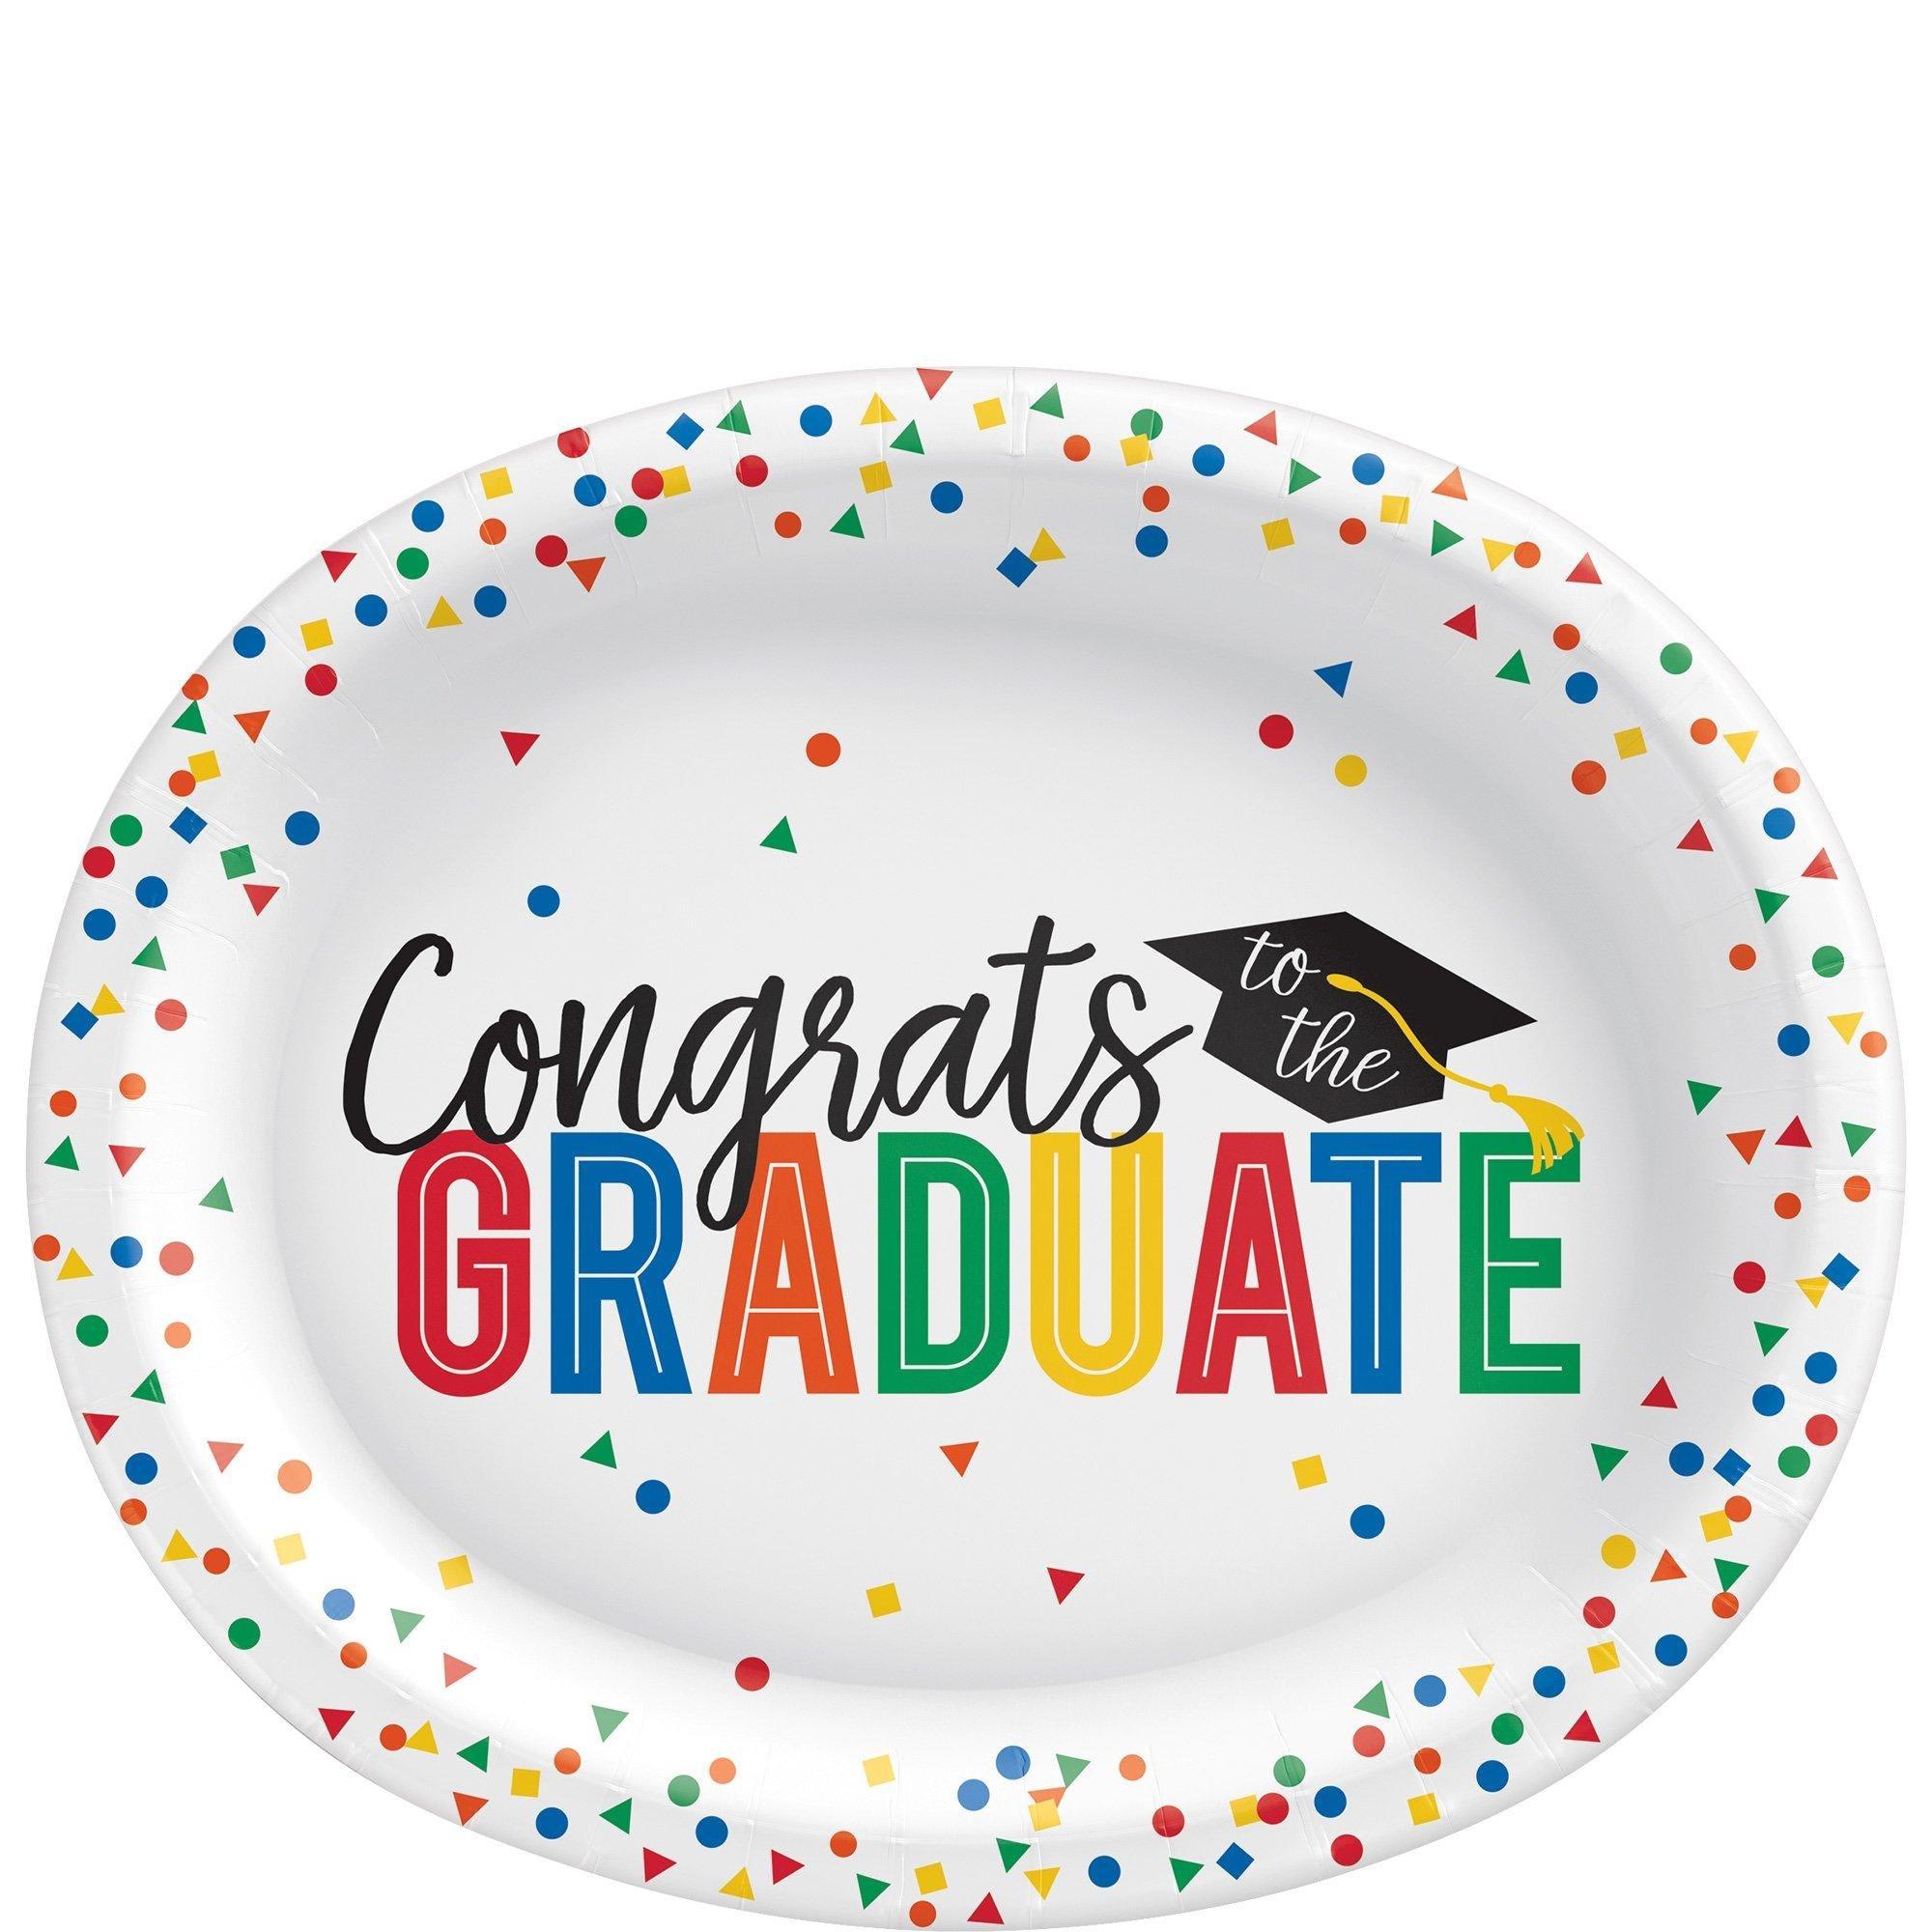 Graduation Party Supplies Kit for 20 with Decorations, Banners, Plates, Napkins, Cups - Graduation Brights